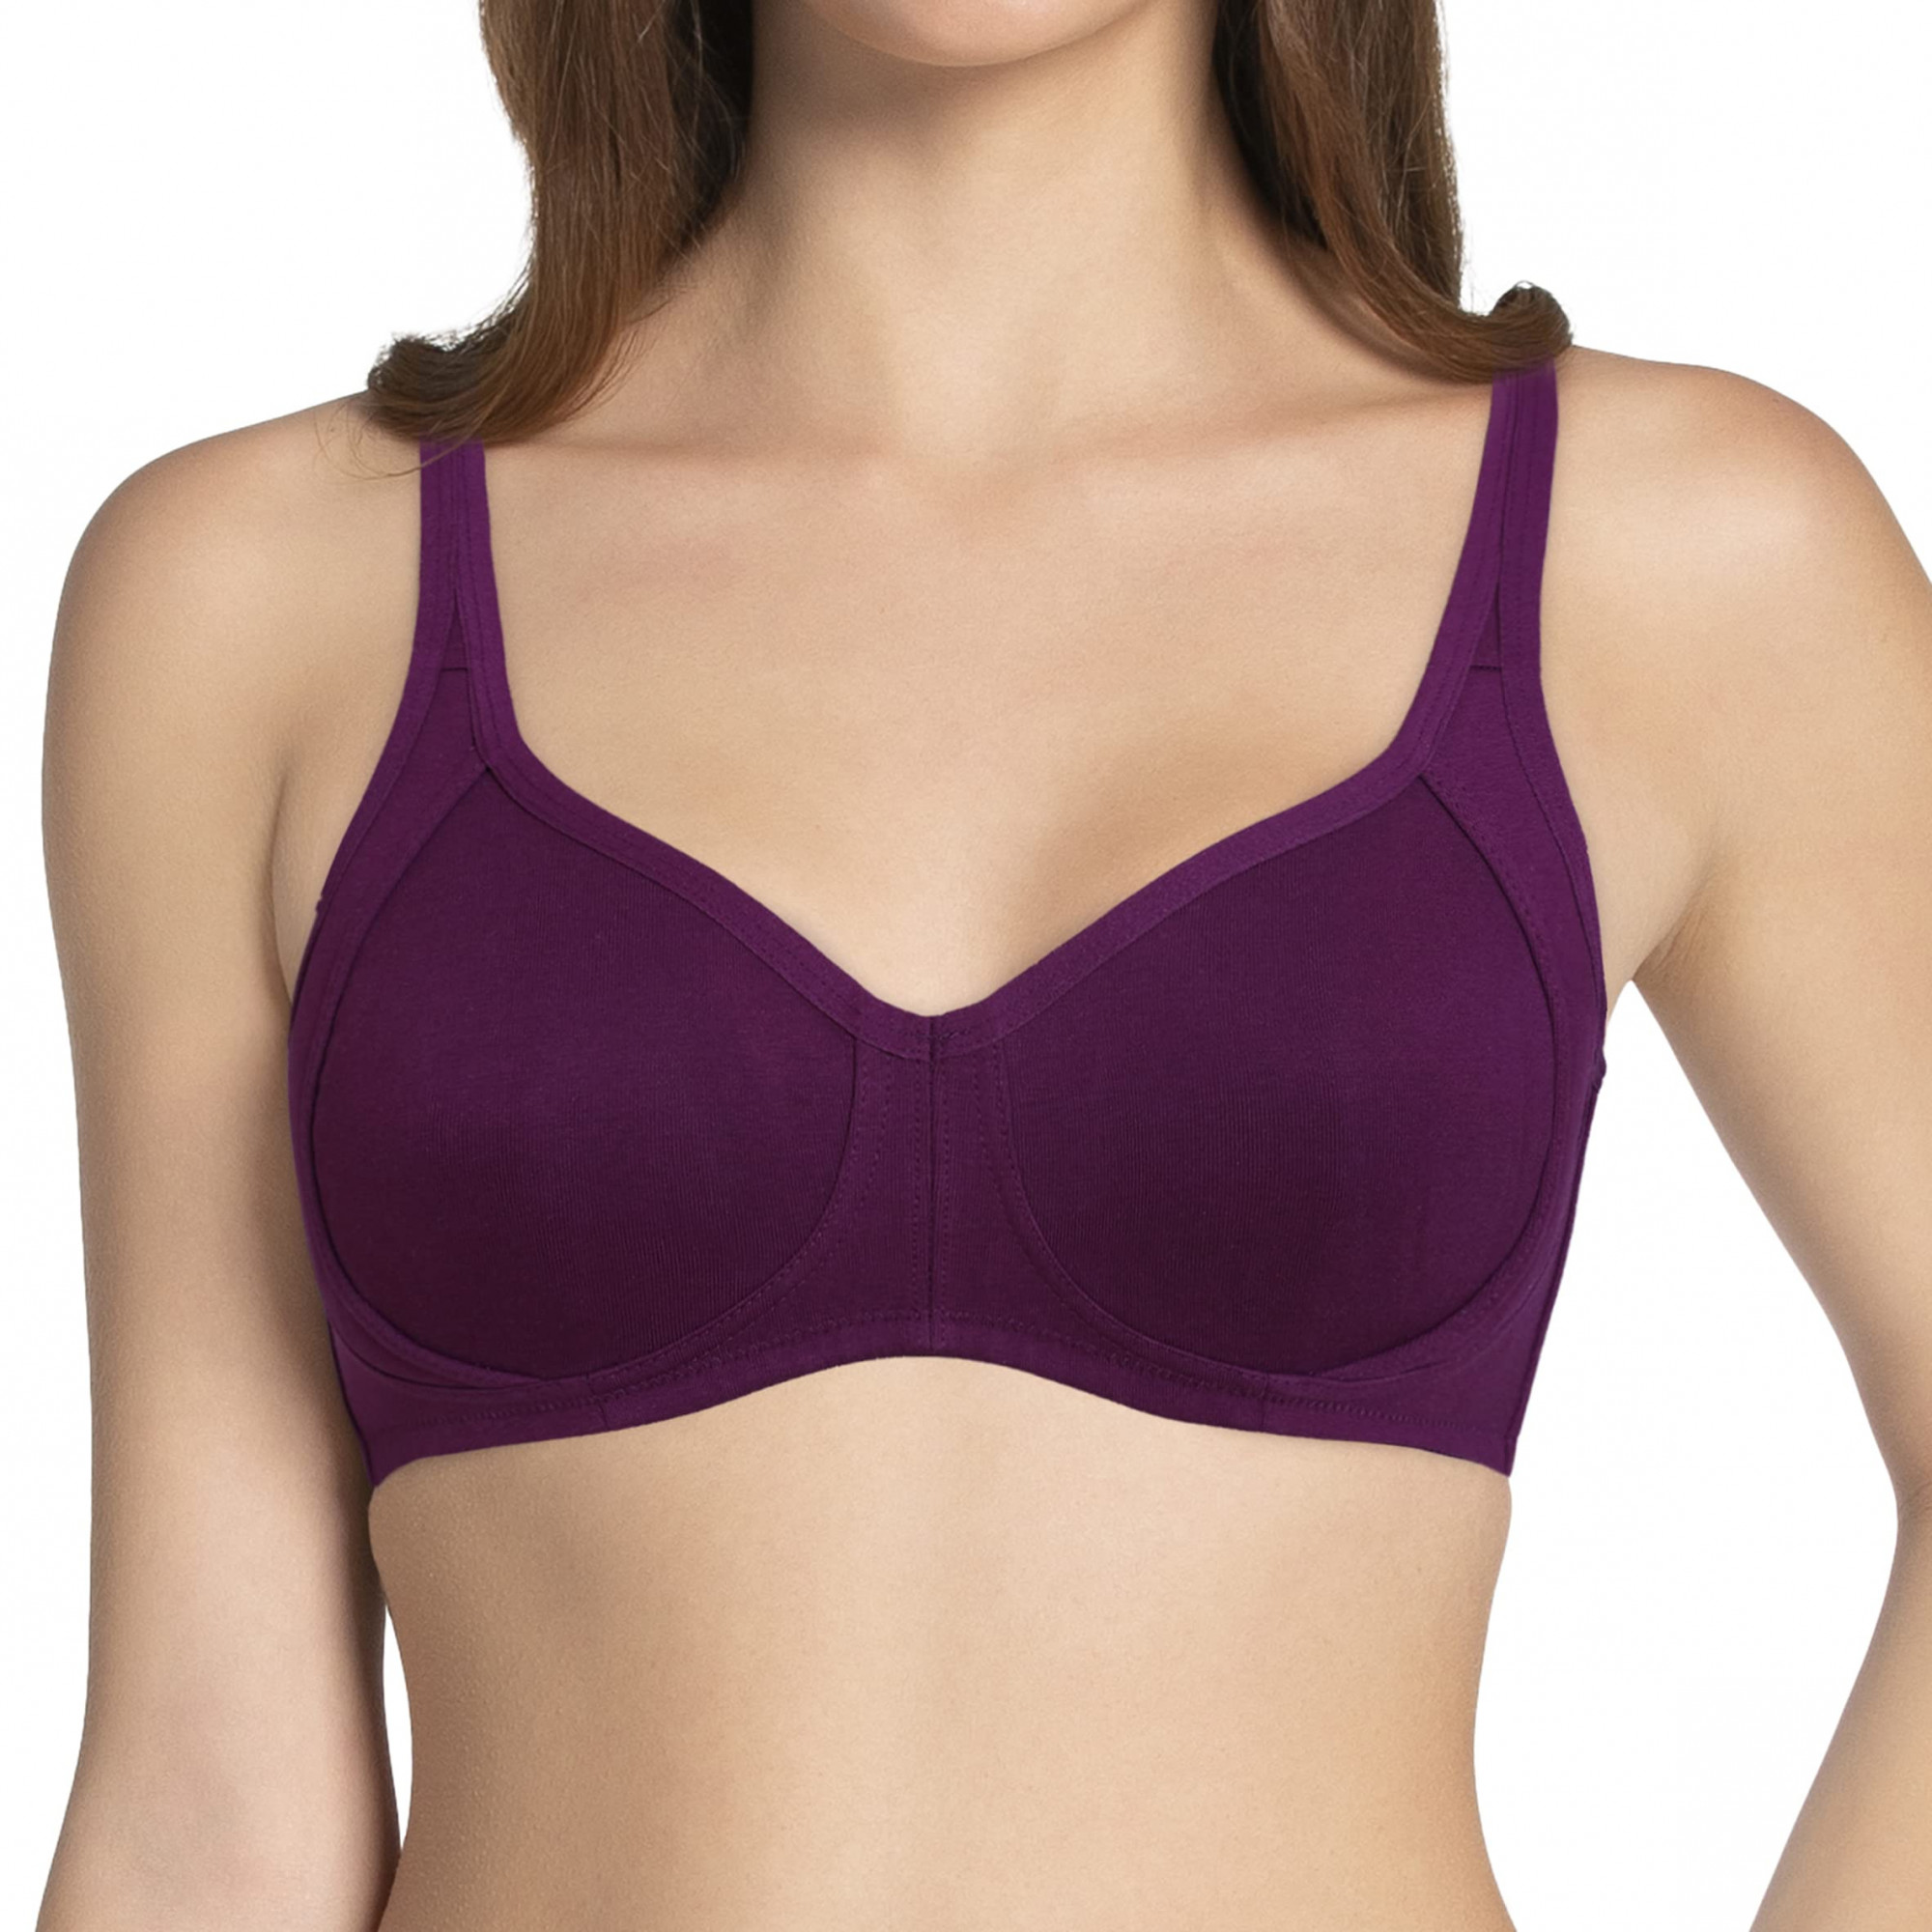 Enamor Women's Contour Synthetic High Impected Padded Wire Free